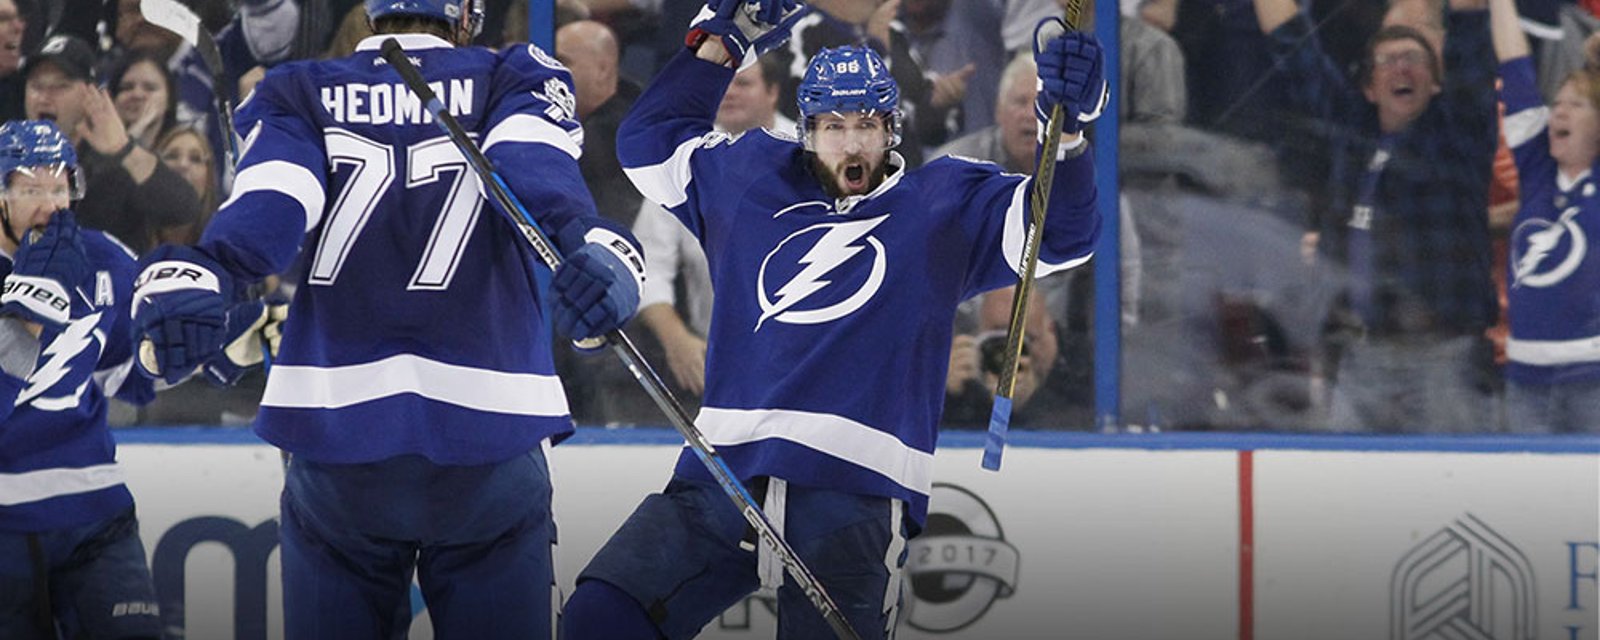 Your Call: Will the Lightning return to the playoffs in 2017-18?